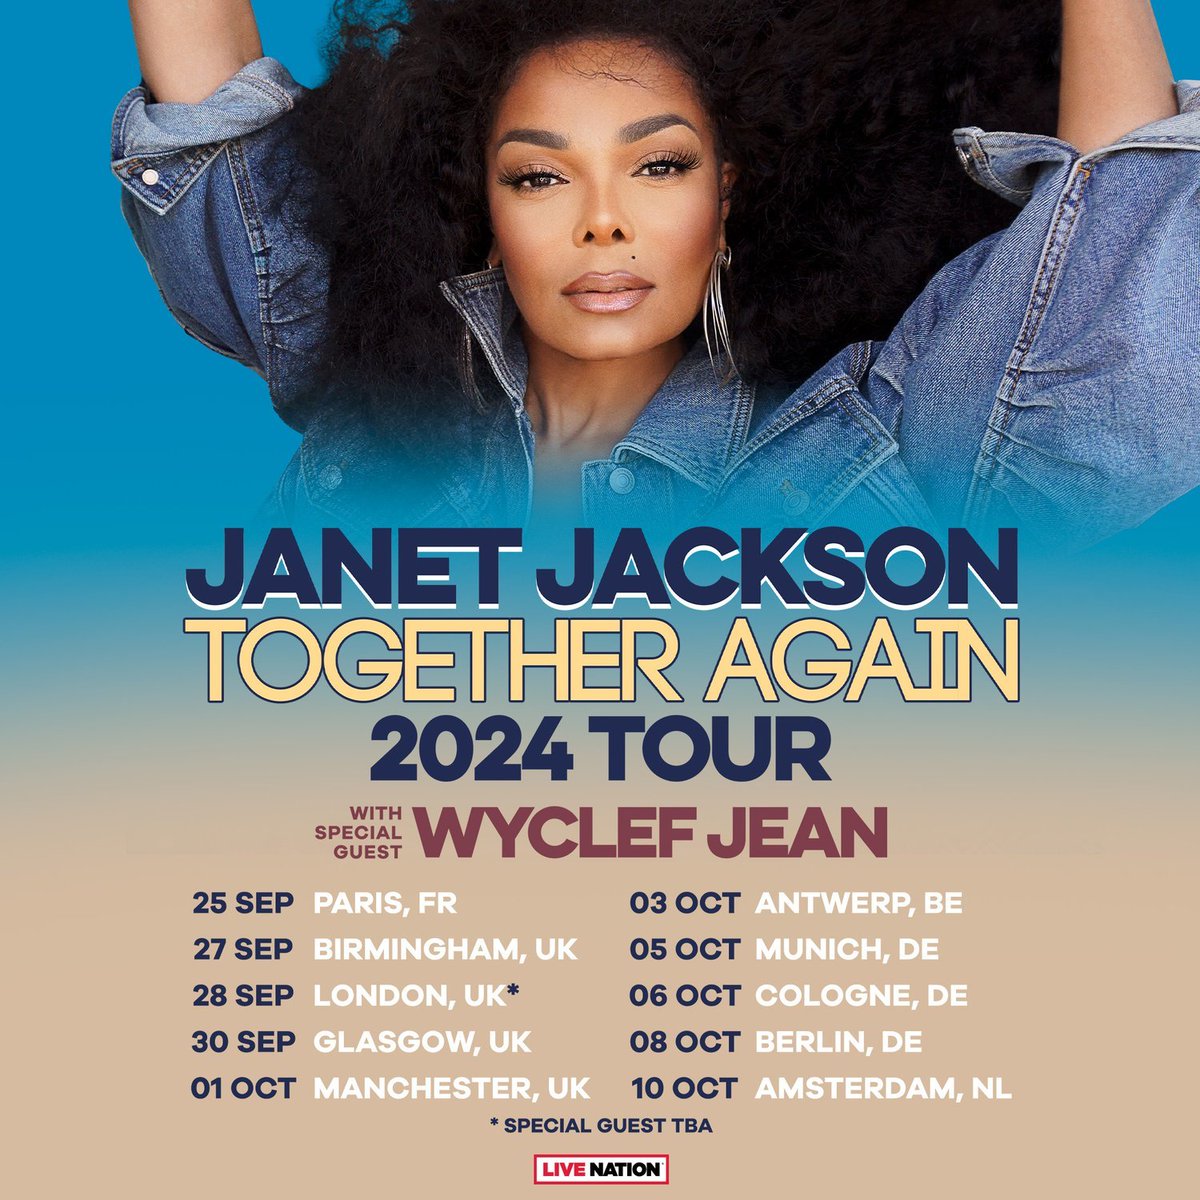 Tickets for JANET JACKSON'S TOGETHER AGAIN US/Europe 2024 are now available at janetjackson.com 🔥🔥🔥